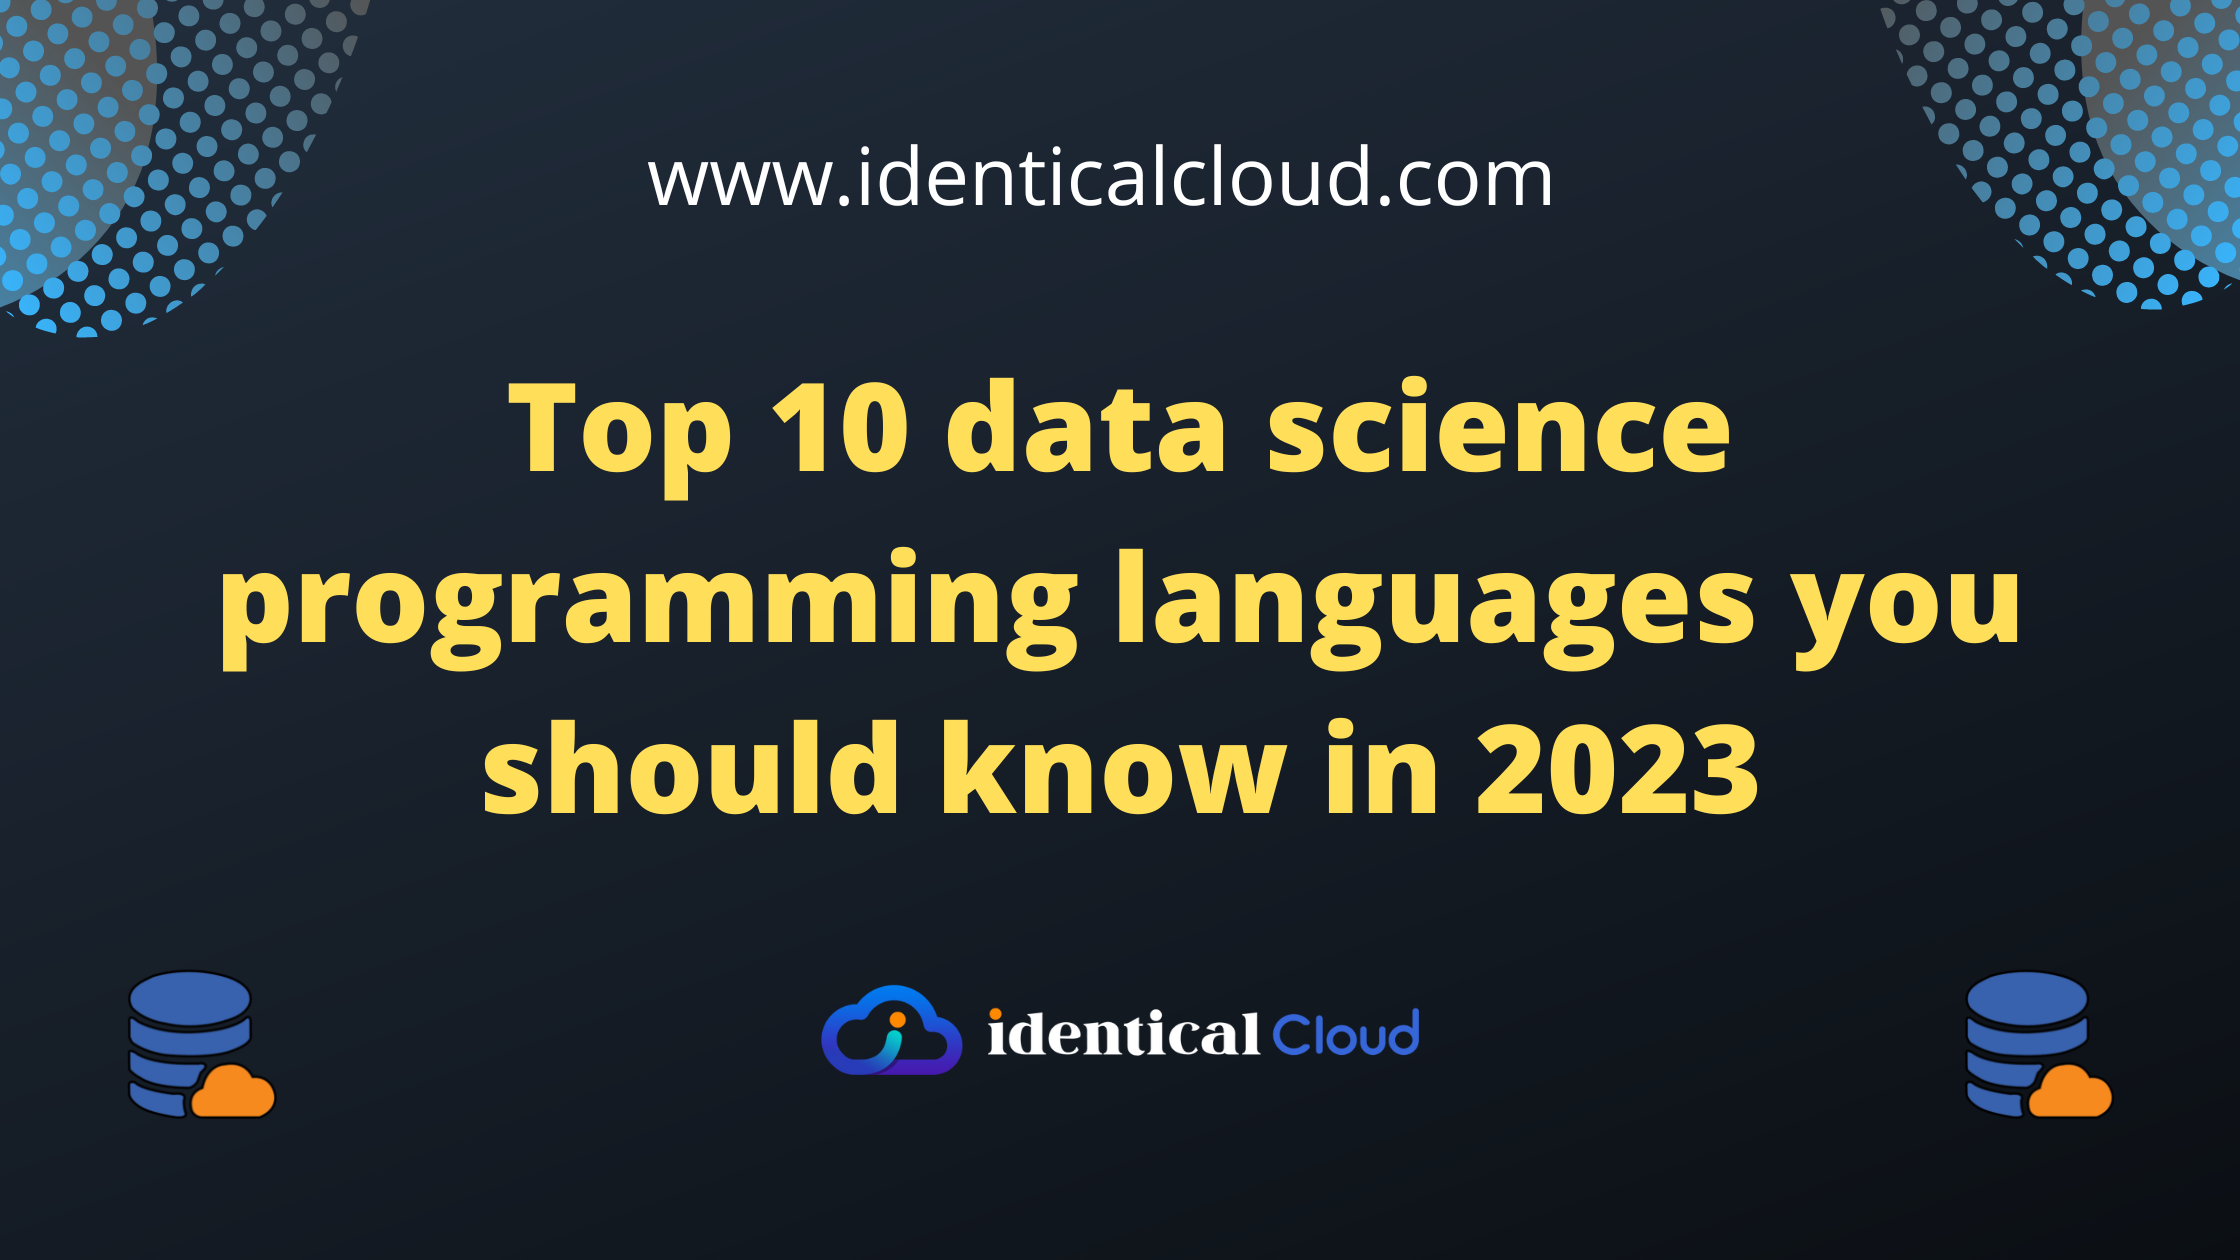 Top 10 data science programming languages you should know in 2023 - identicalcloud.com